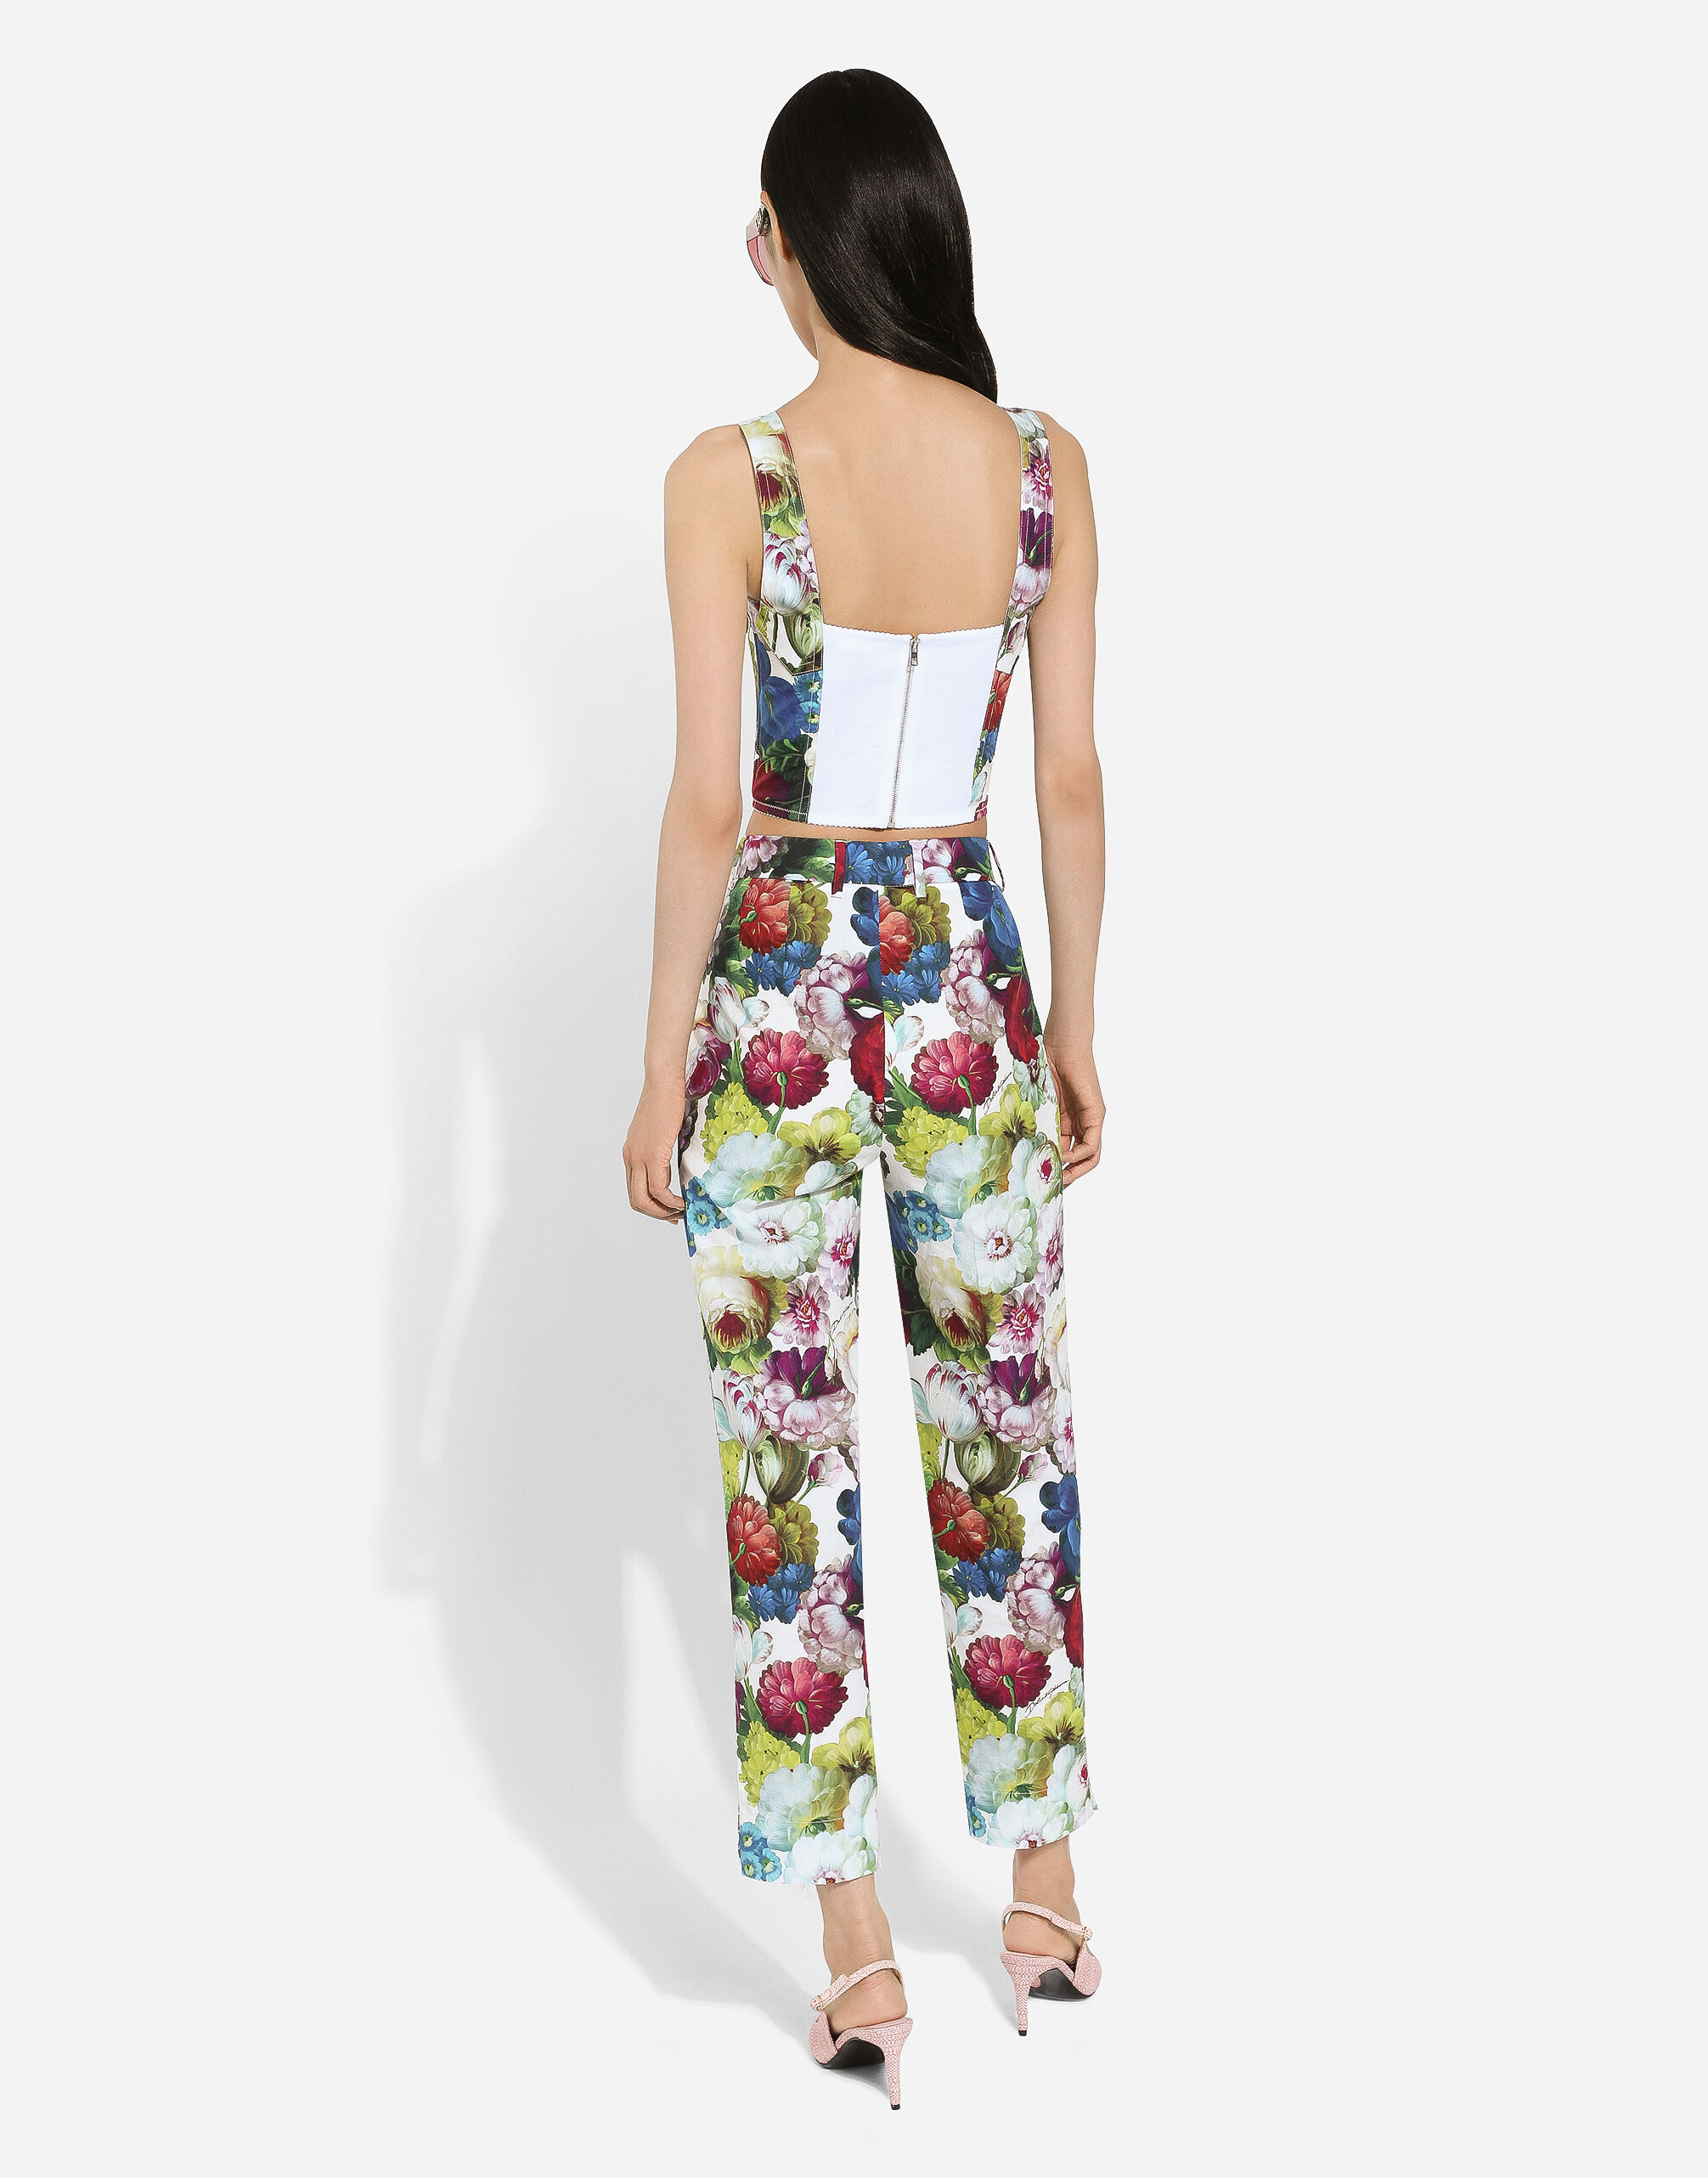 Dolce & Gabbana Cotton pants with nocturnal flower print female Print